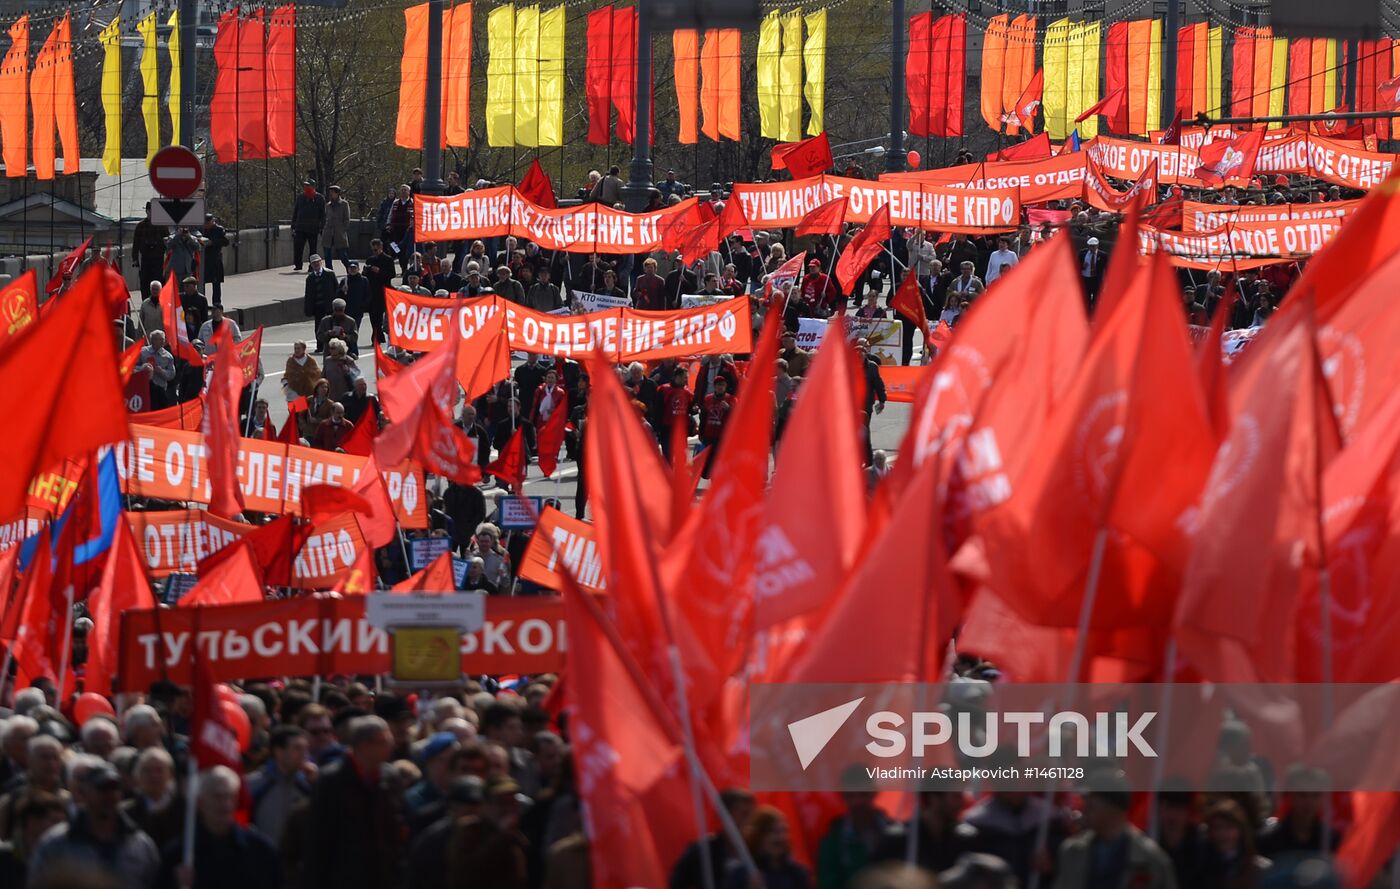 Communist Party's rally in Moscow